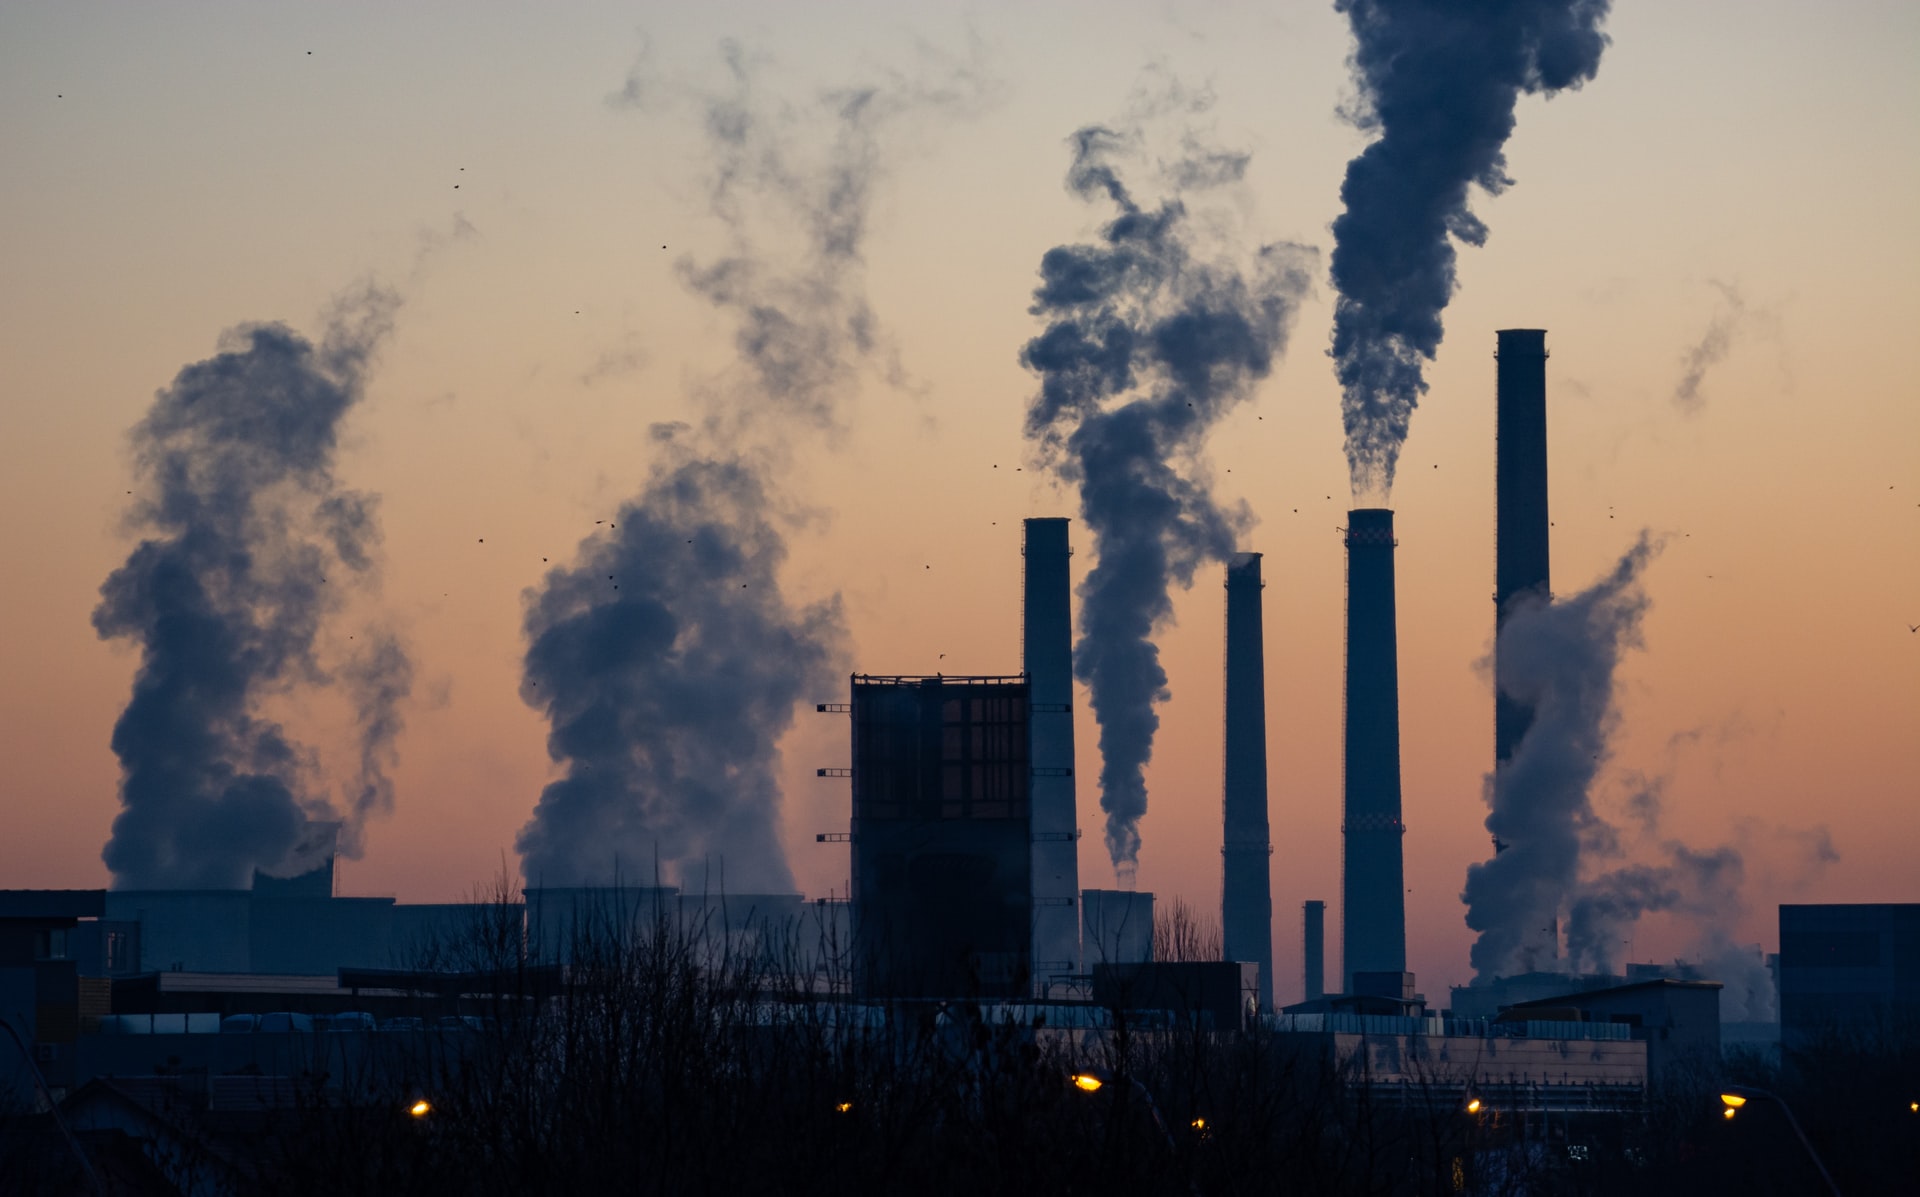 Addressing jointly air pollution and climate change to reduce health-economic impacts